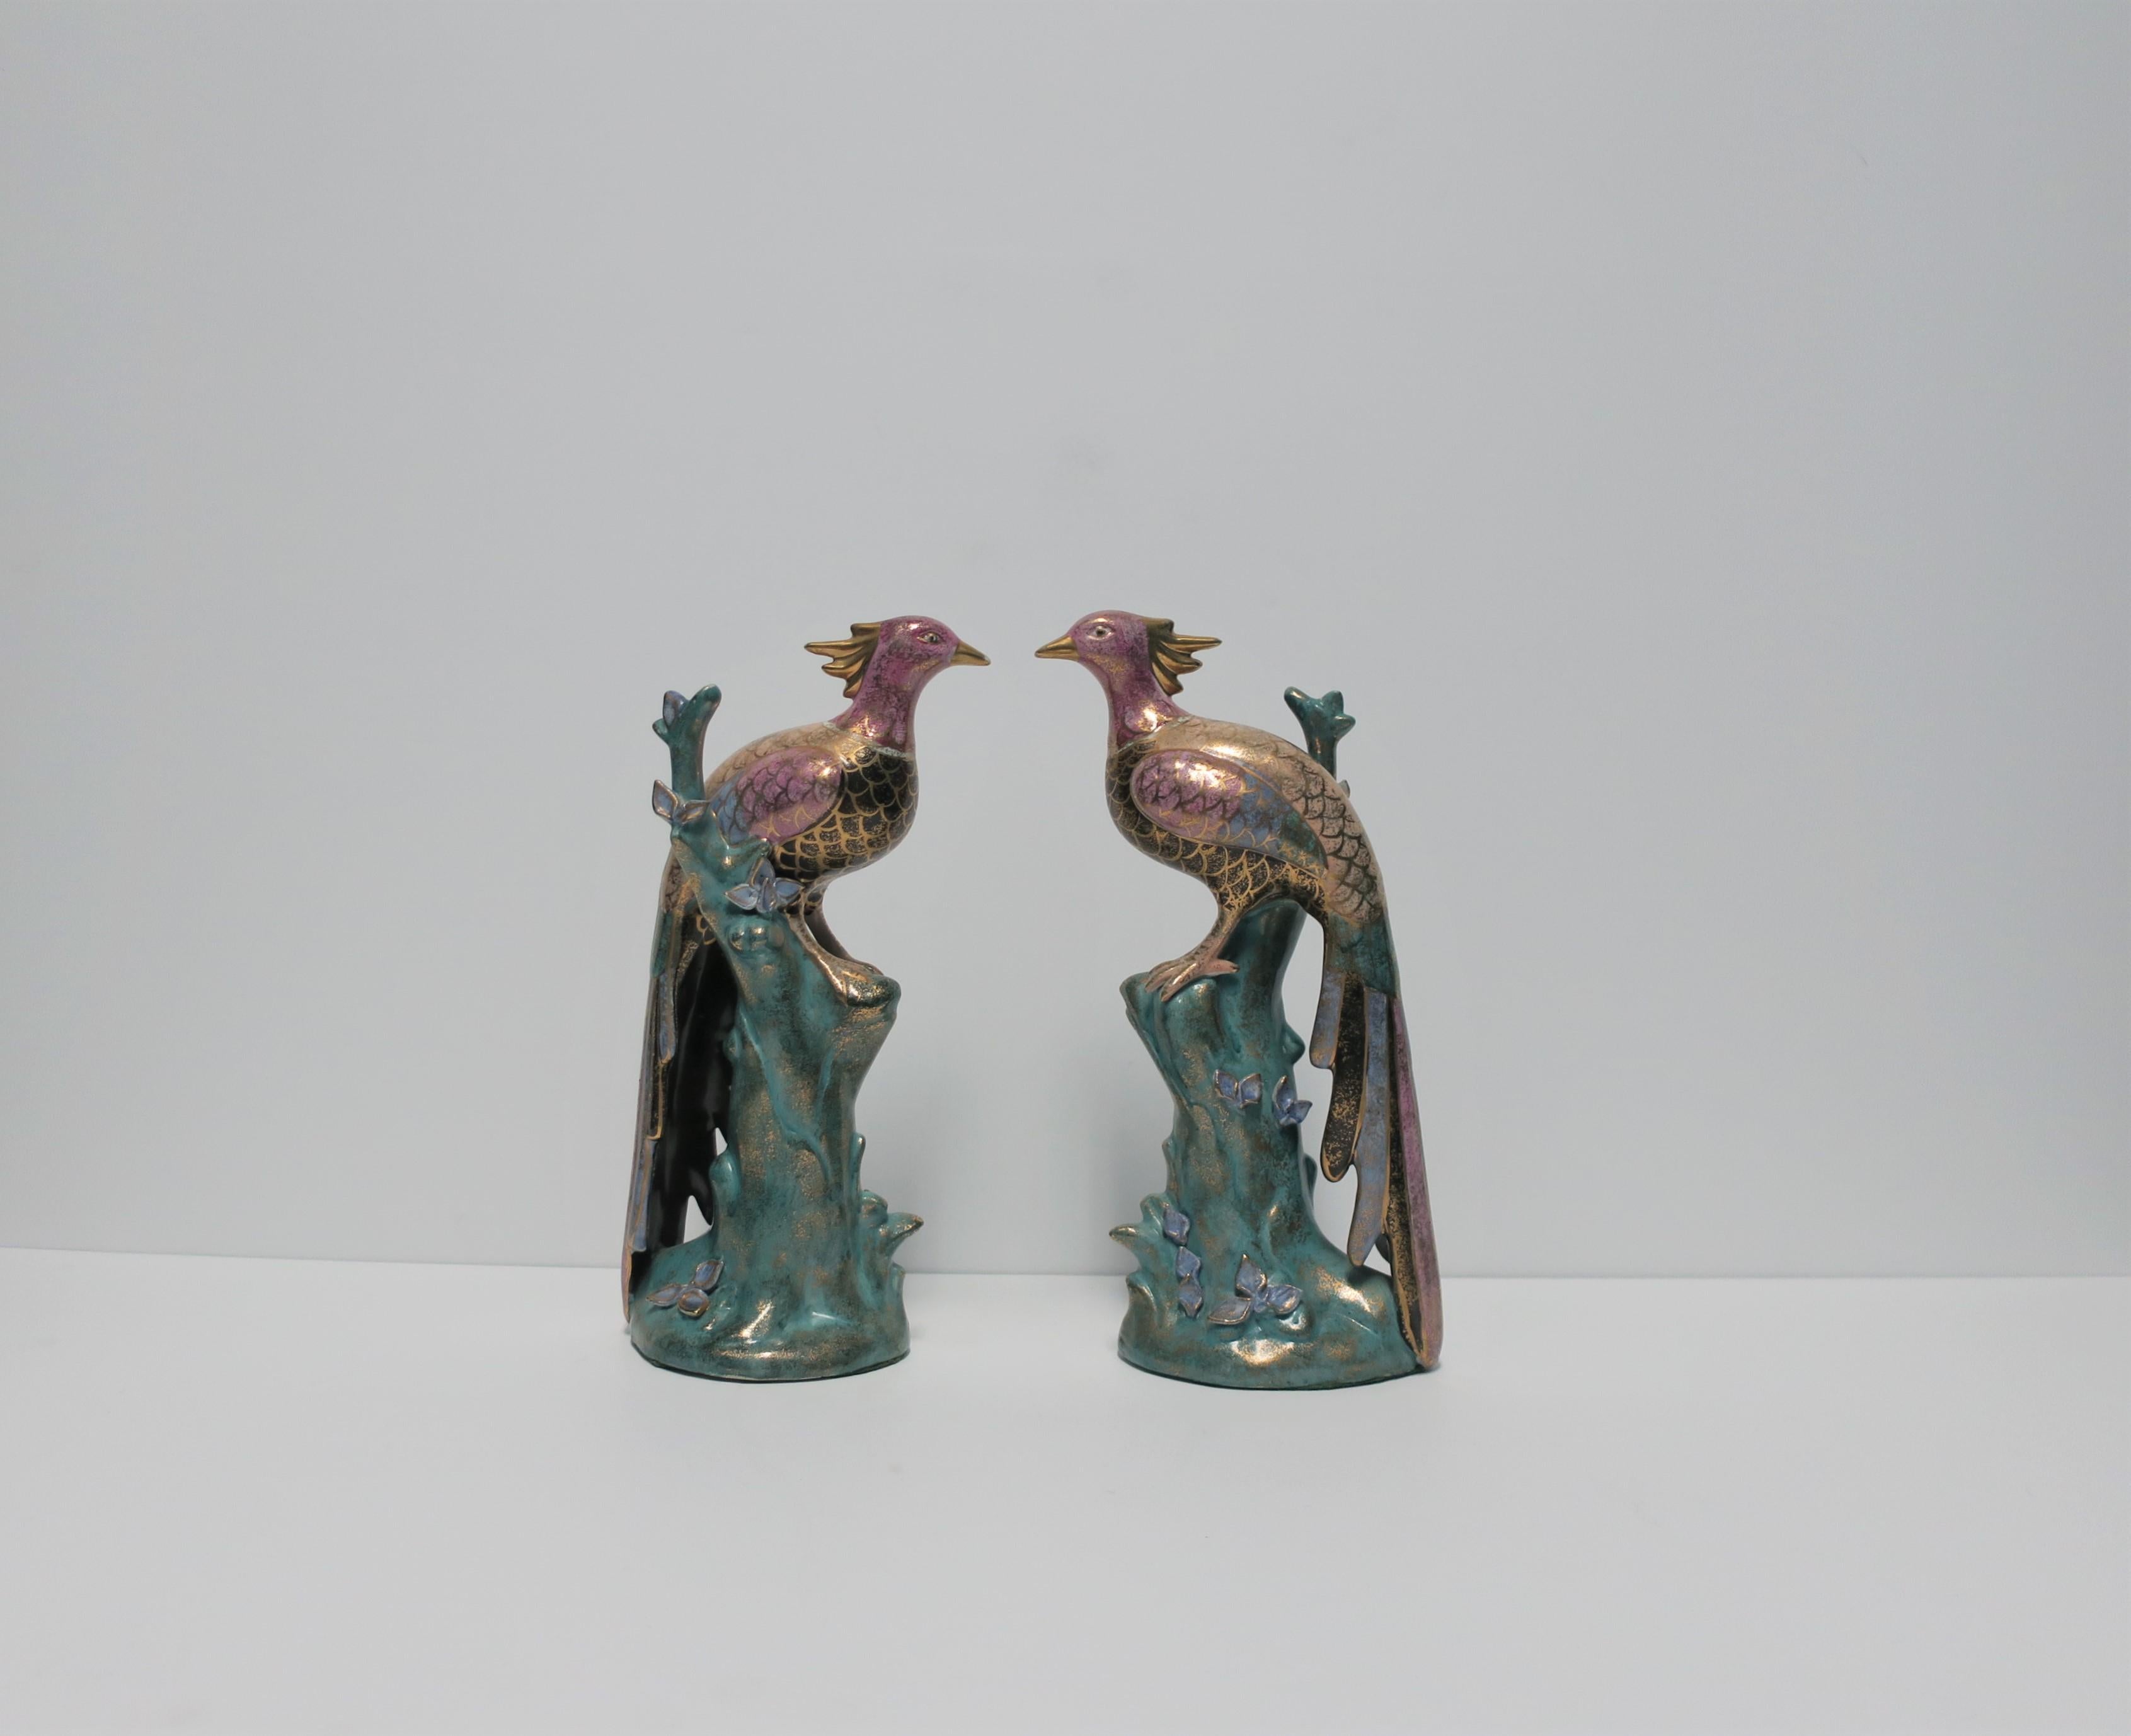 A beautiful and detailed pair of mid-20th century or earlier black and gold peacock or phoenix bird ceramic sculptures decorative objects perched on branch. Each peacock or phoenix bird is relatively tall measuring 10.5